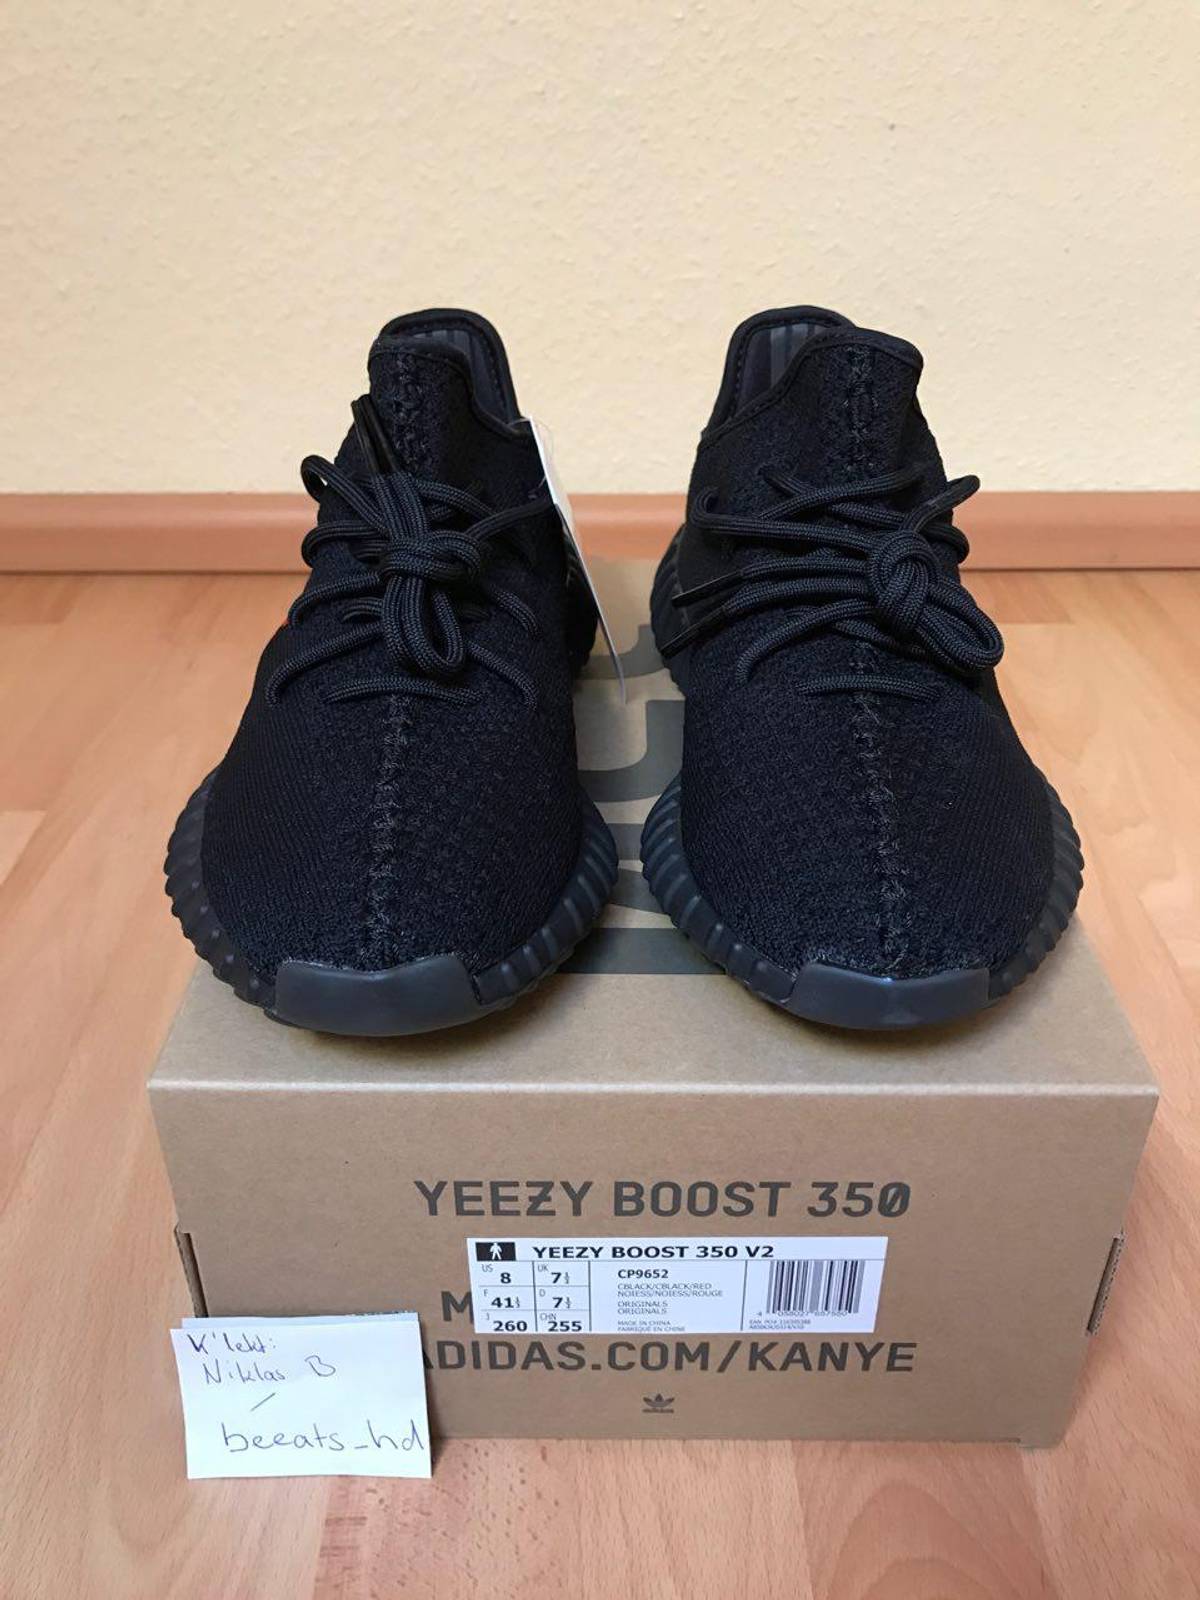 Men 's Yeezy boost 350 v2 bred canada Size 6